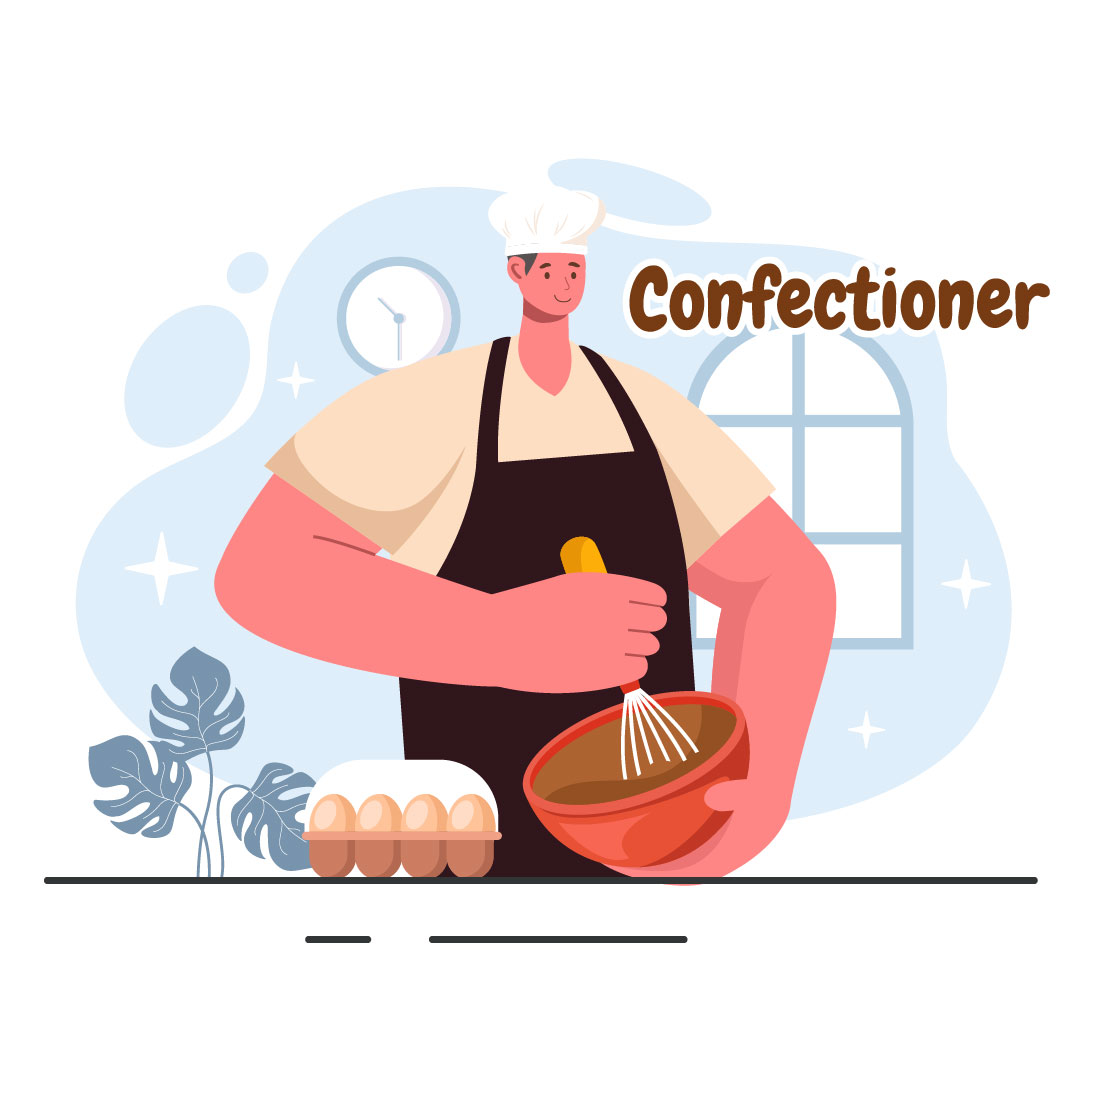 9 Confectioner Vector Illustration preview image.